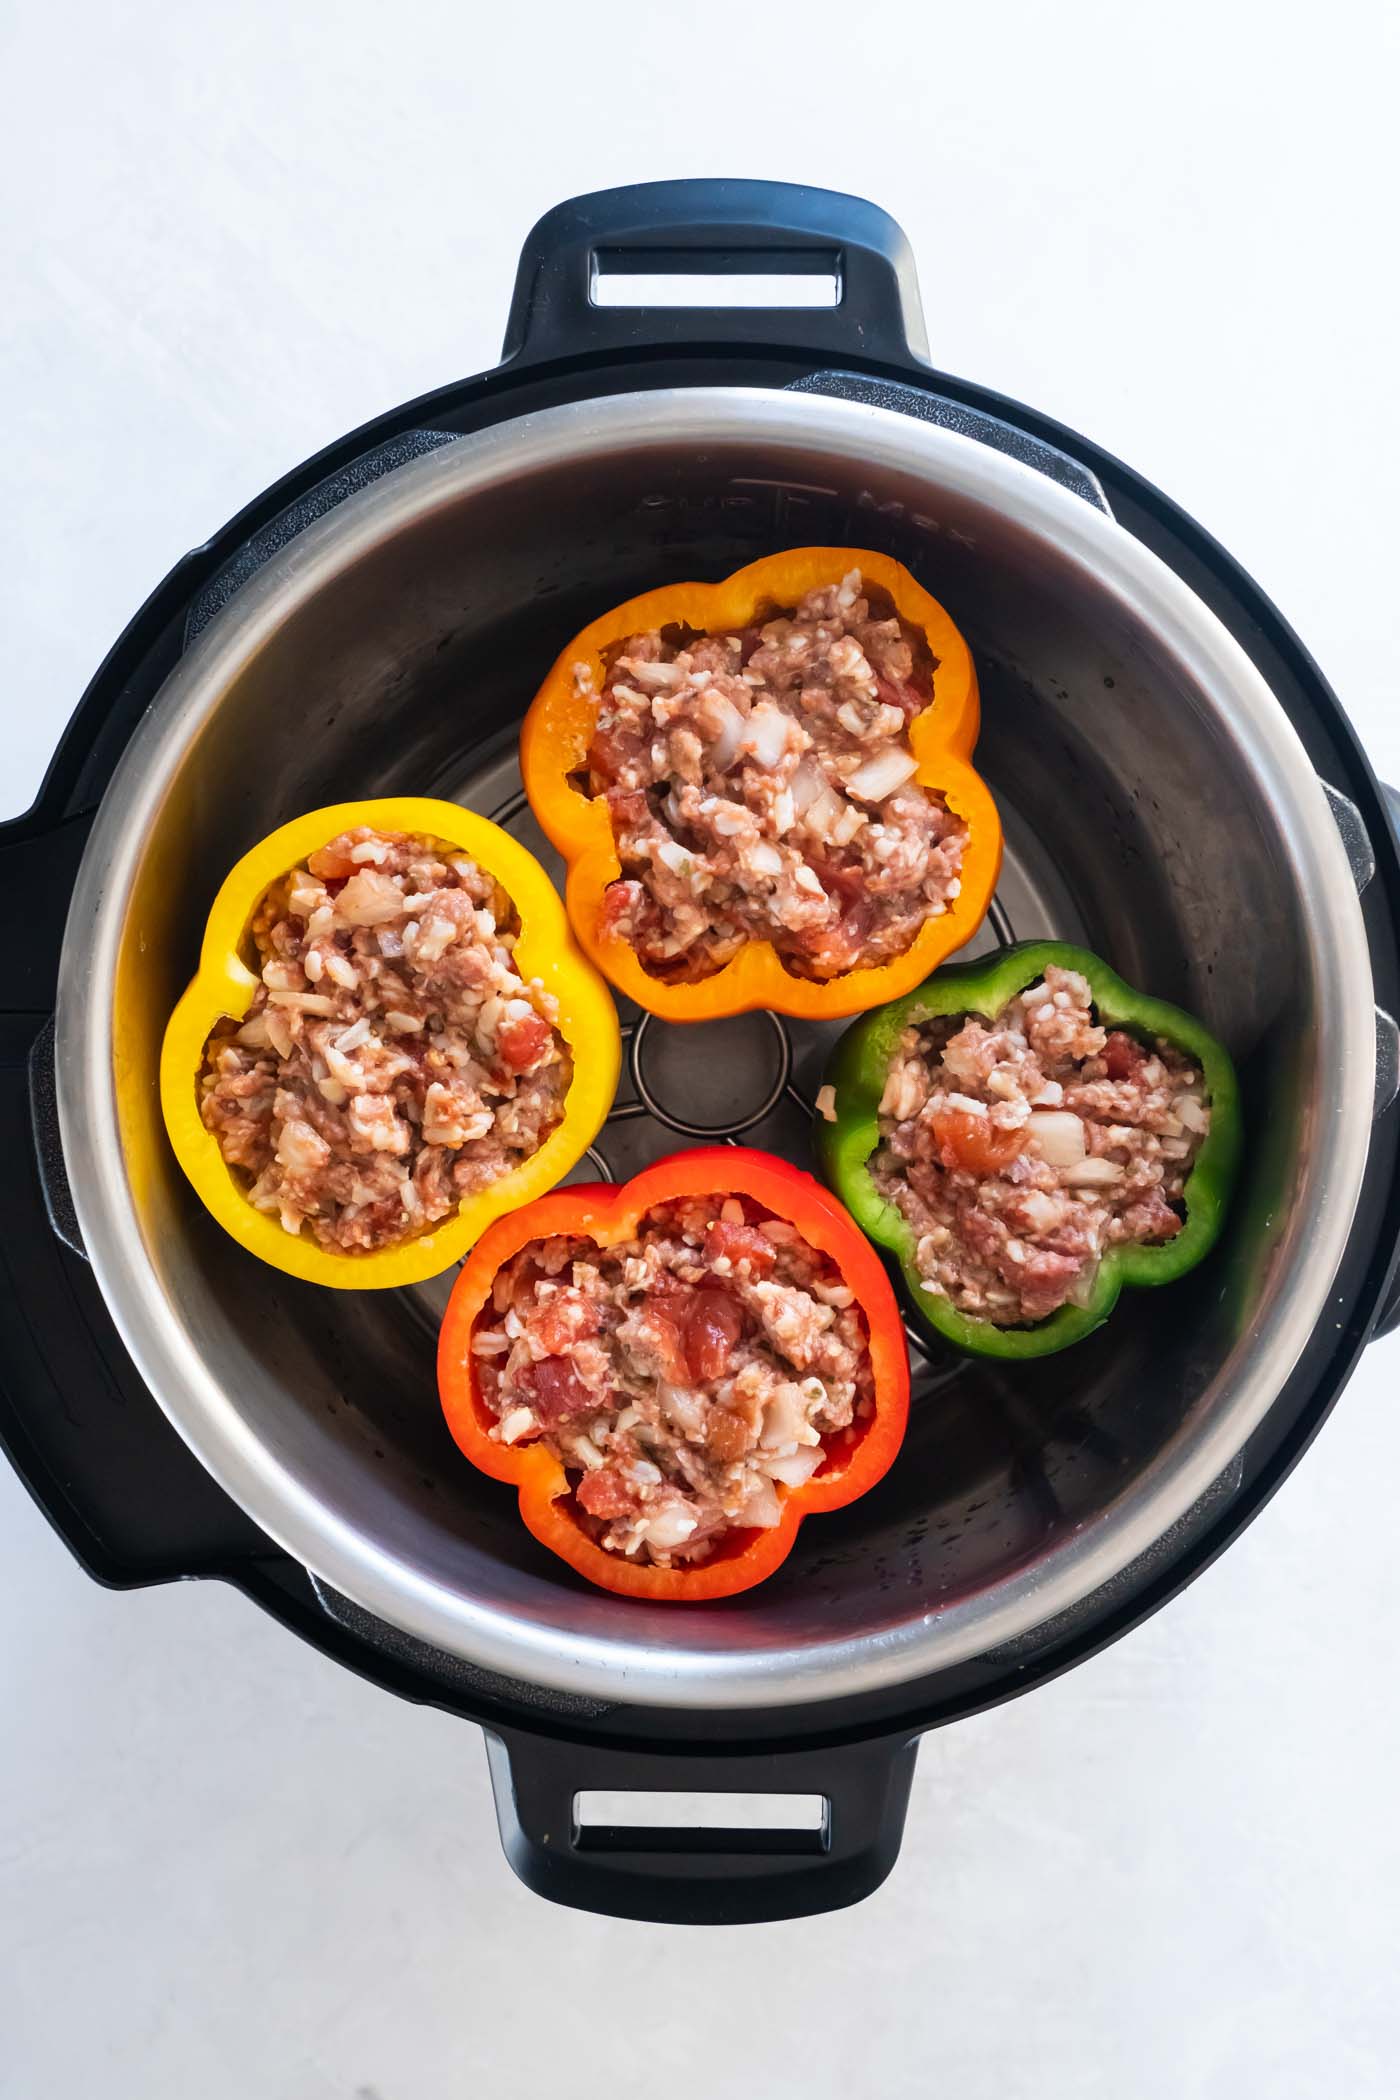 Peppers with ground beef filling in instant pot.